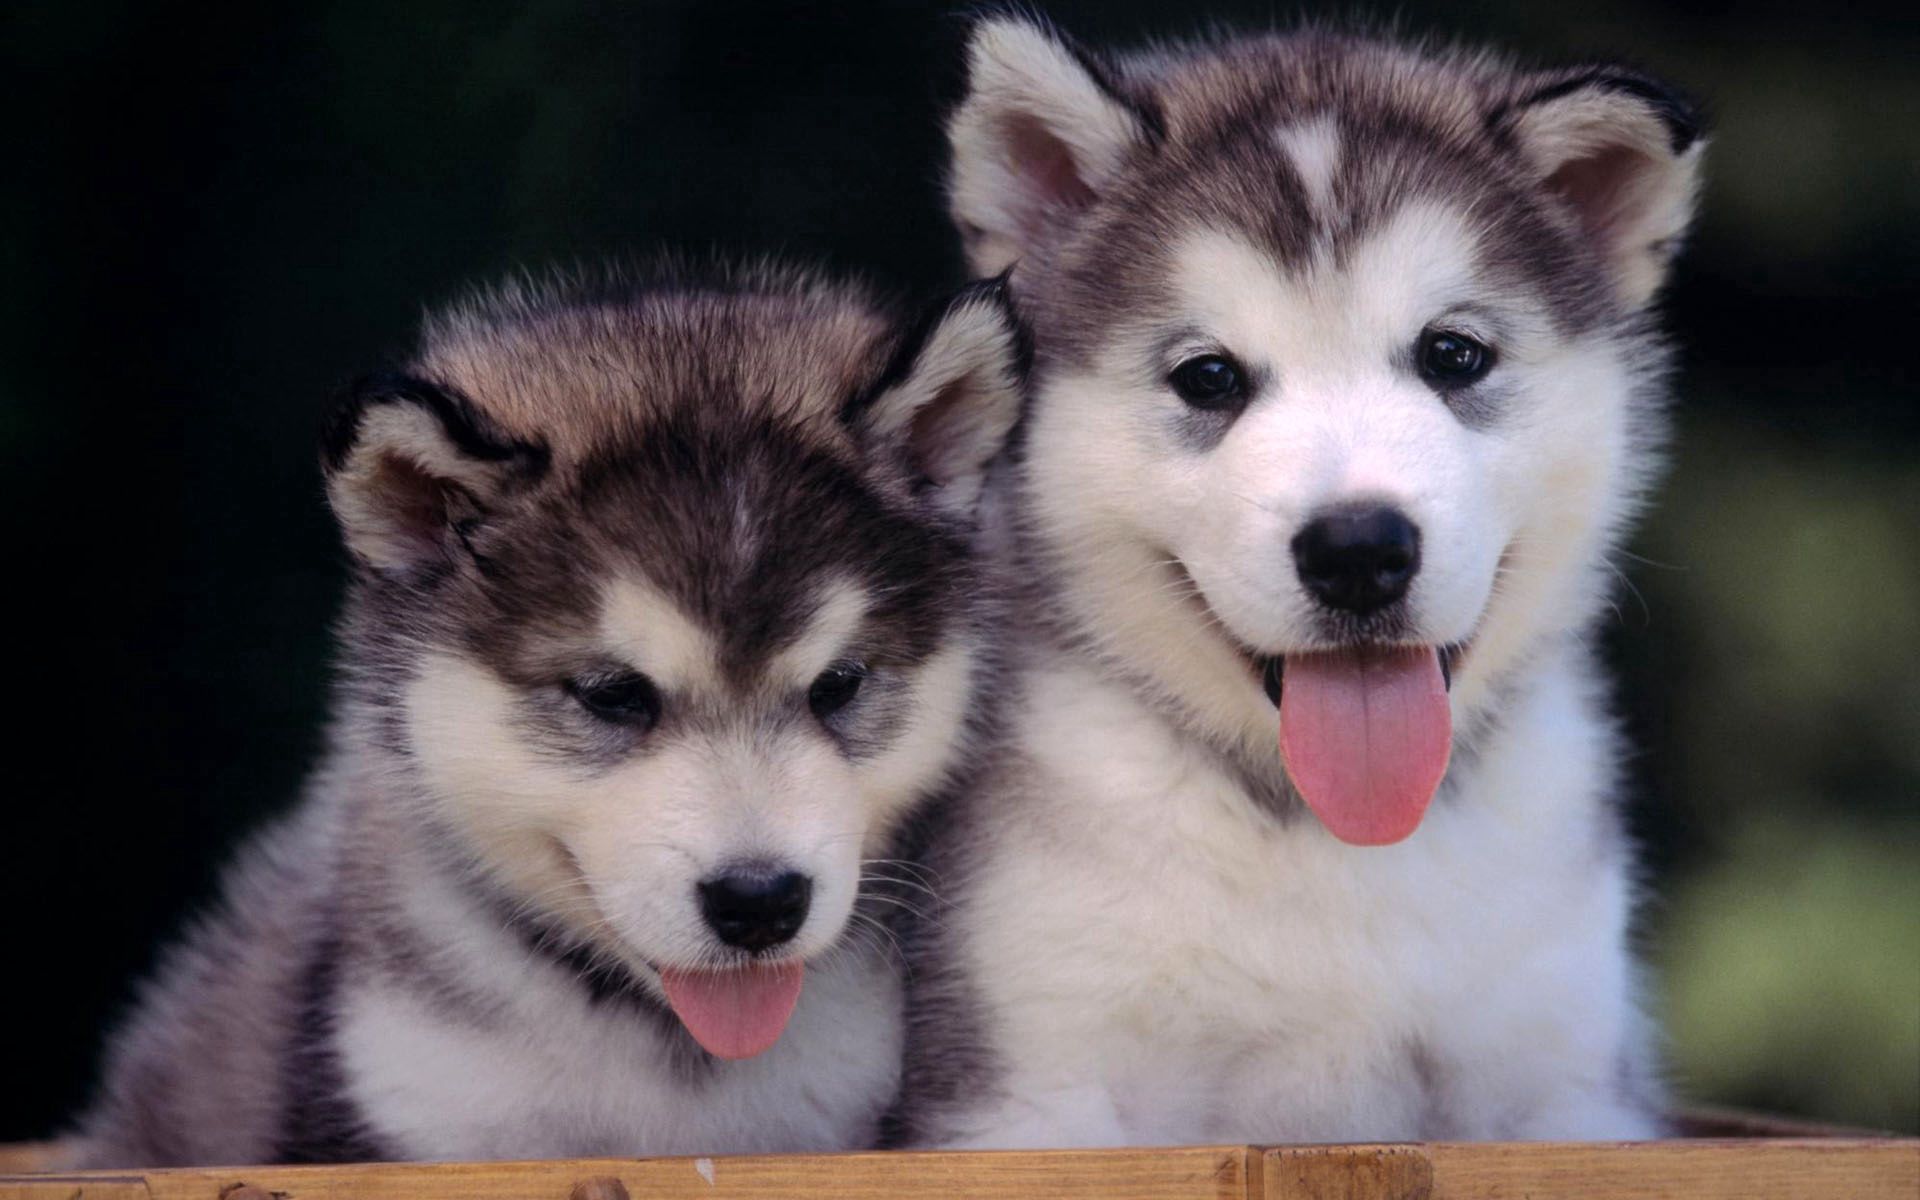 puppies, animals, couple, pair, relaxation, rest, husky